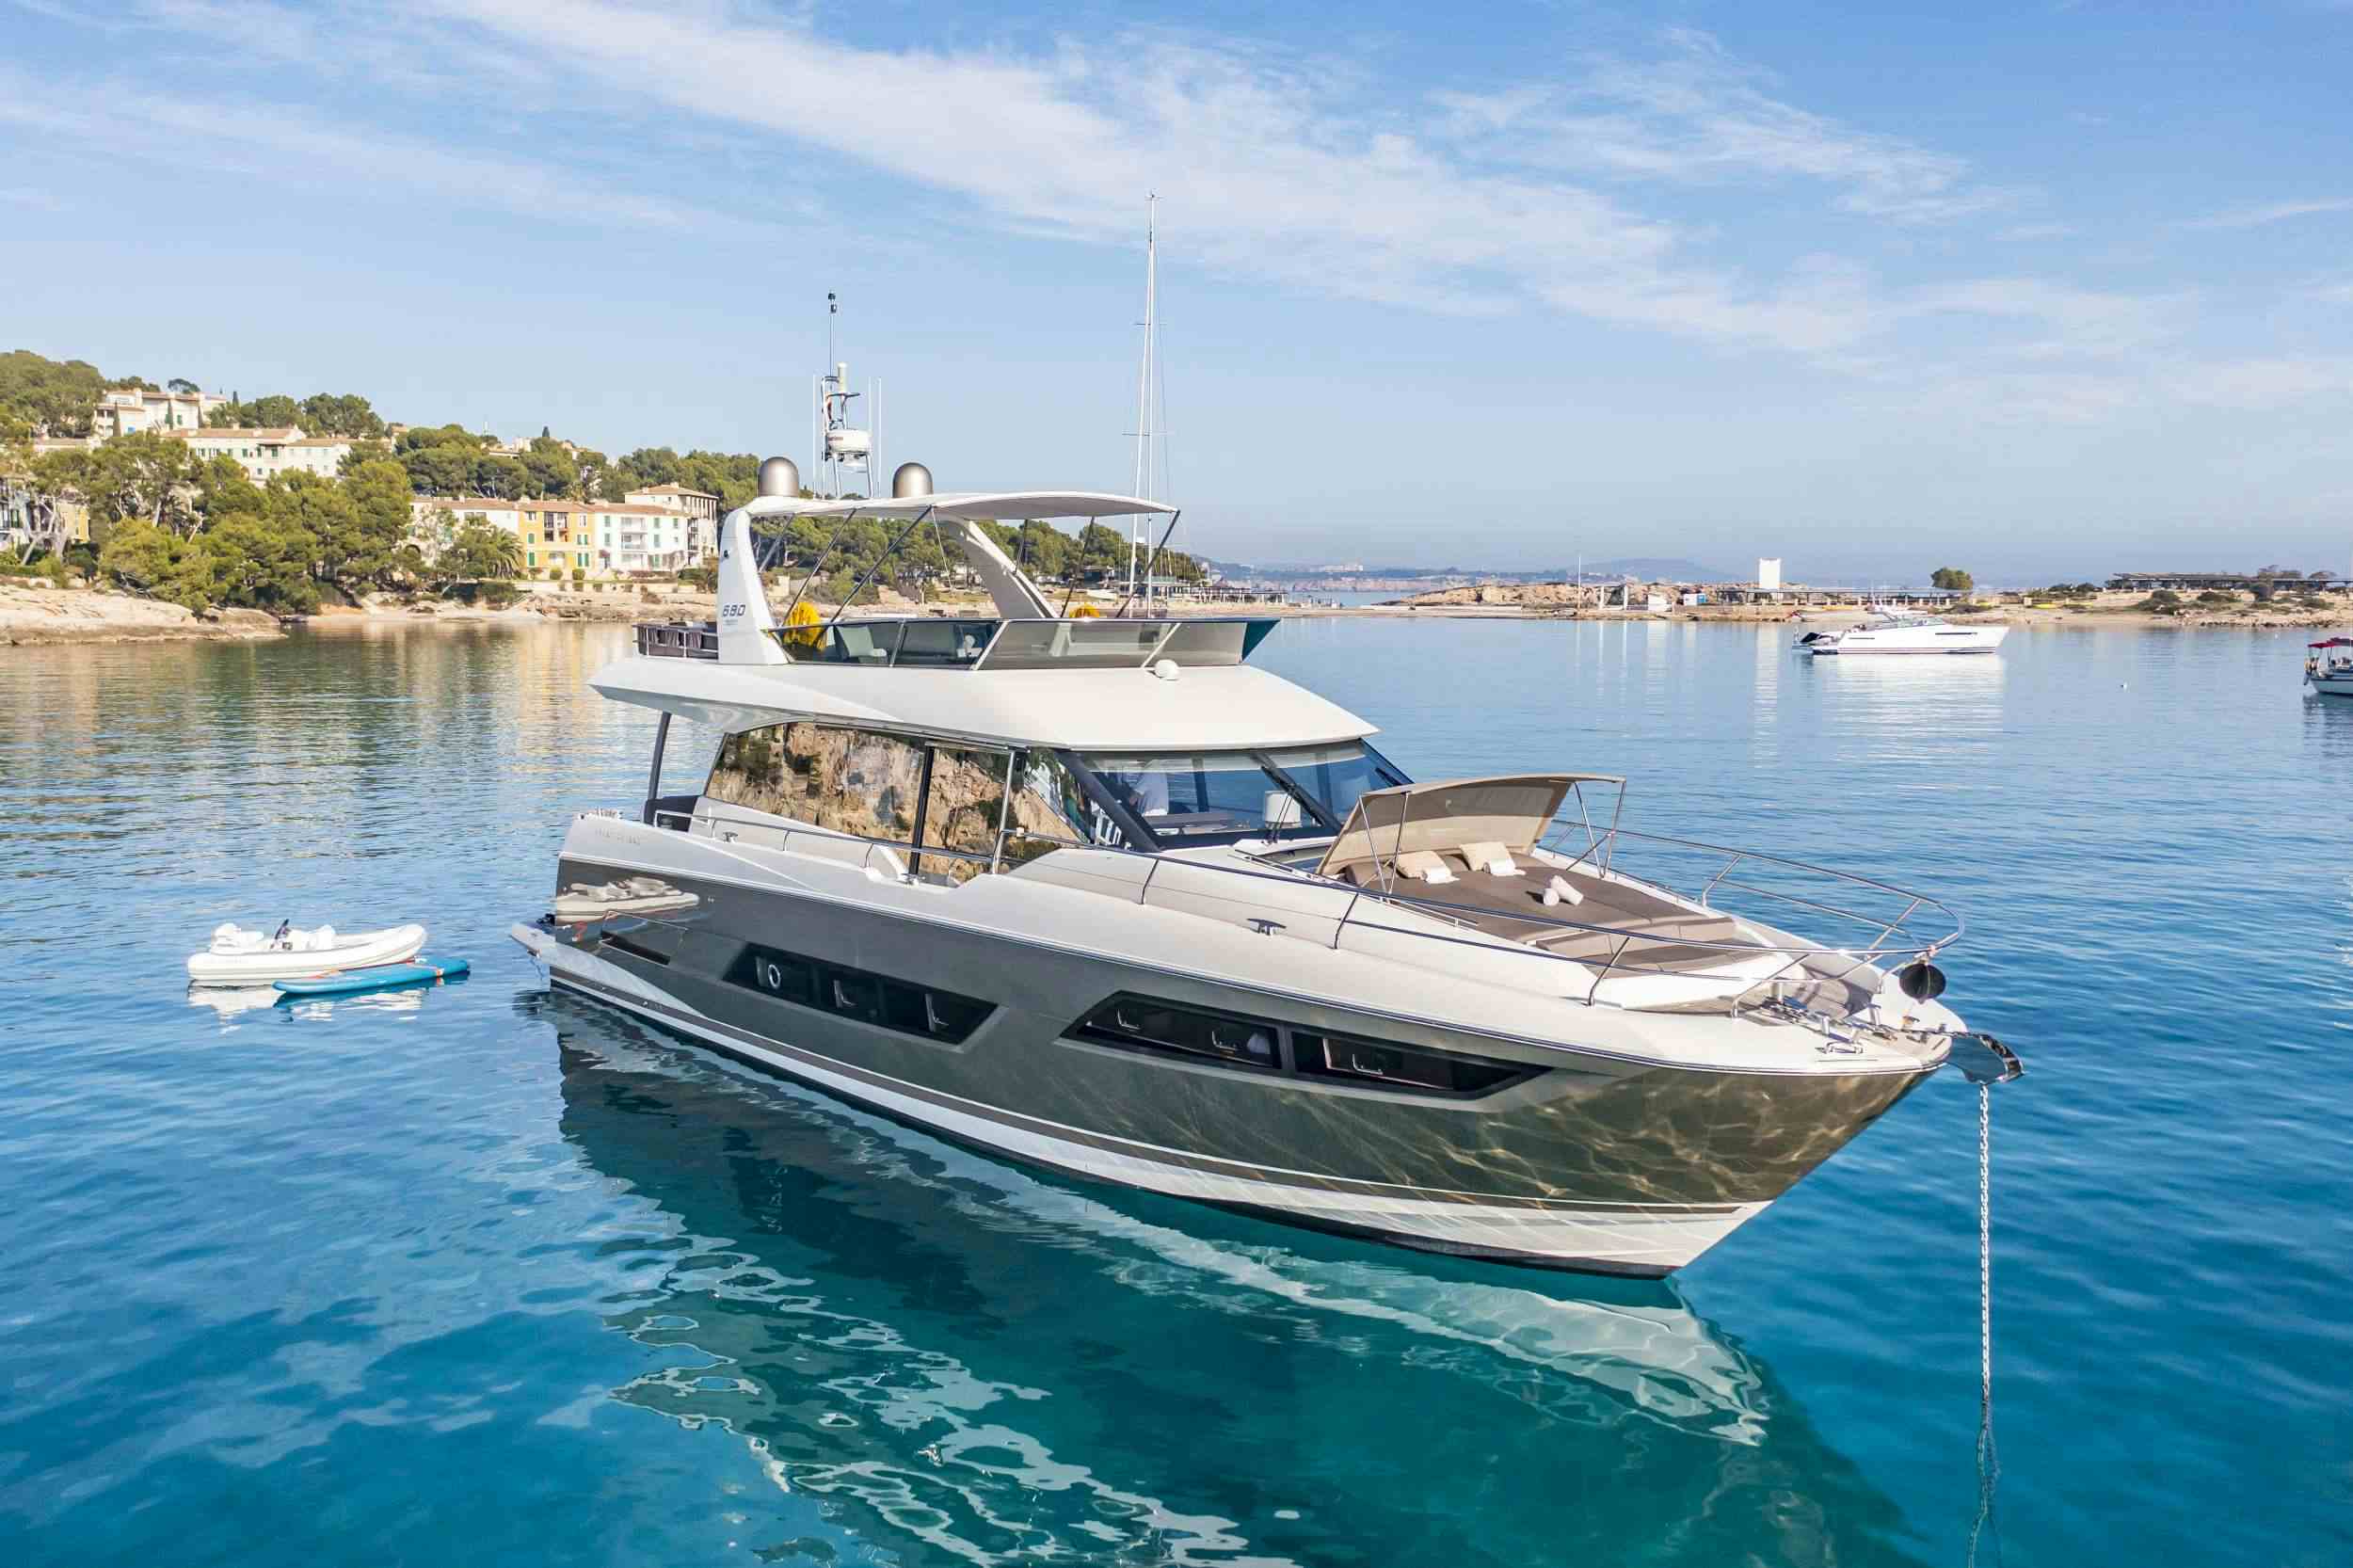 BLUE M - Yacht Charter Propriano & Boat hire in W. Med -Naples/Sicily, W. Med -Riviera/Cors/Sard., W. Med - Spain/Balearics | Winter: Caribbean Virgin Islands (US/BVI), Caribbean Leewards, Caribbean Windwards 1